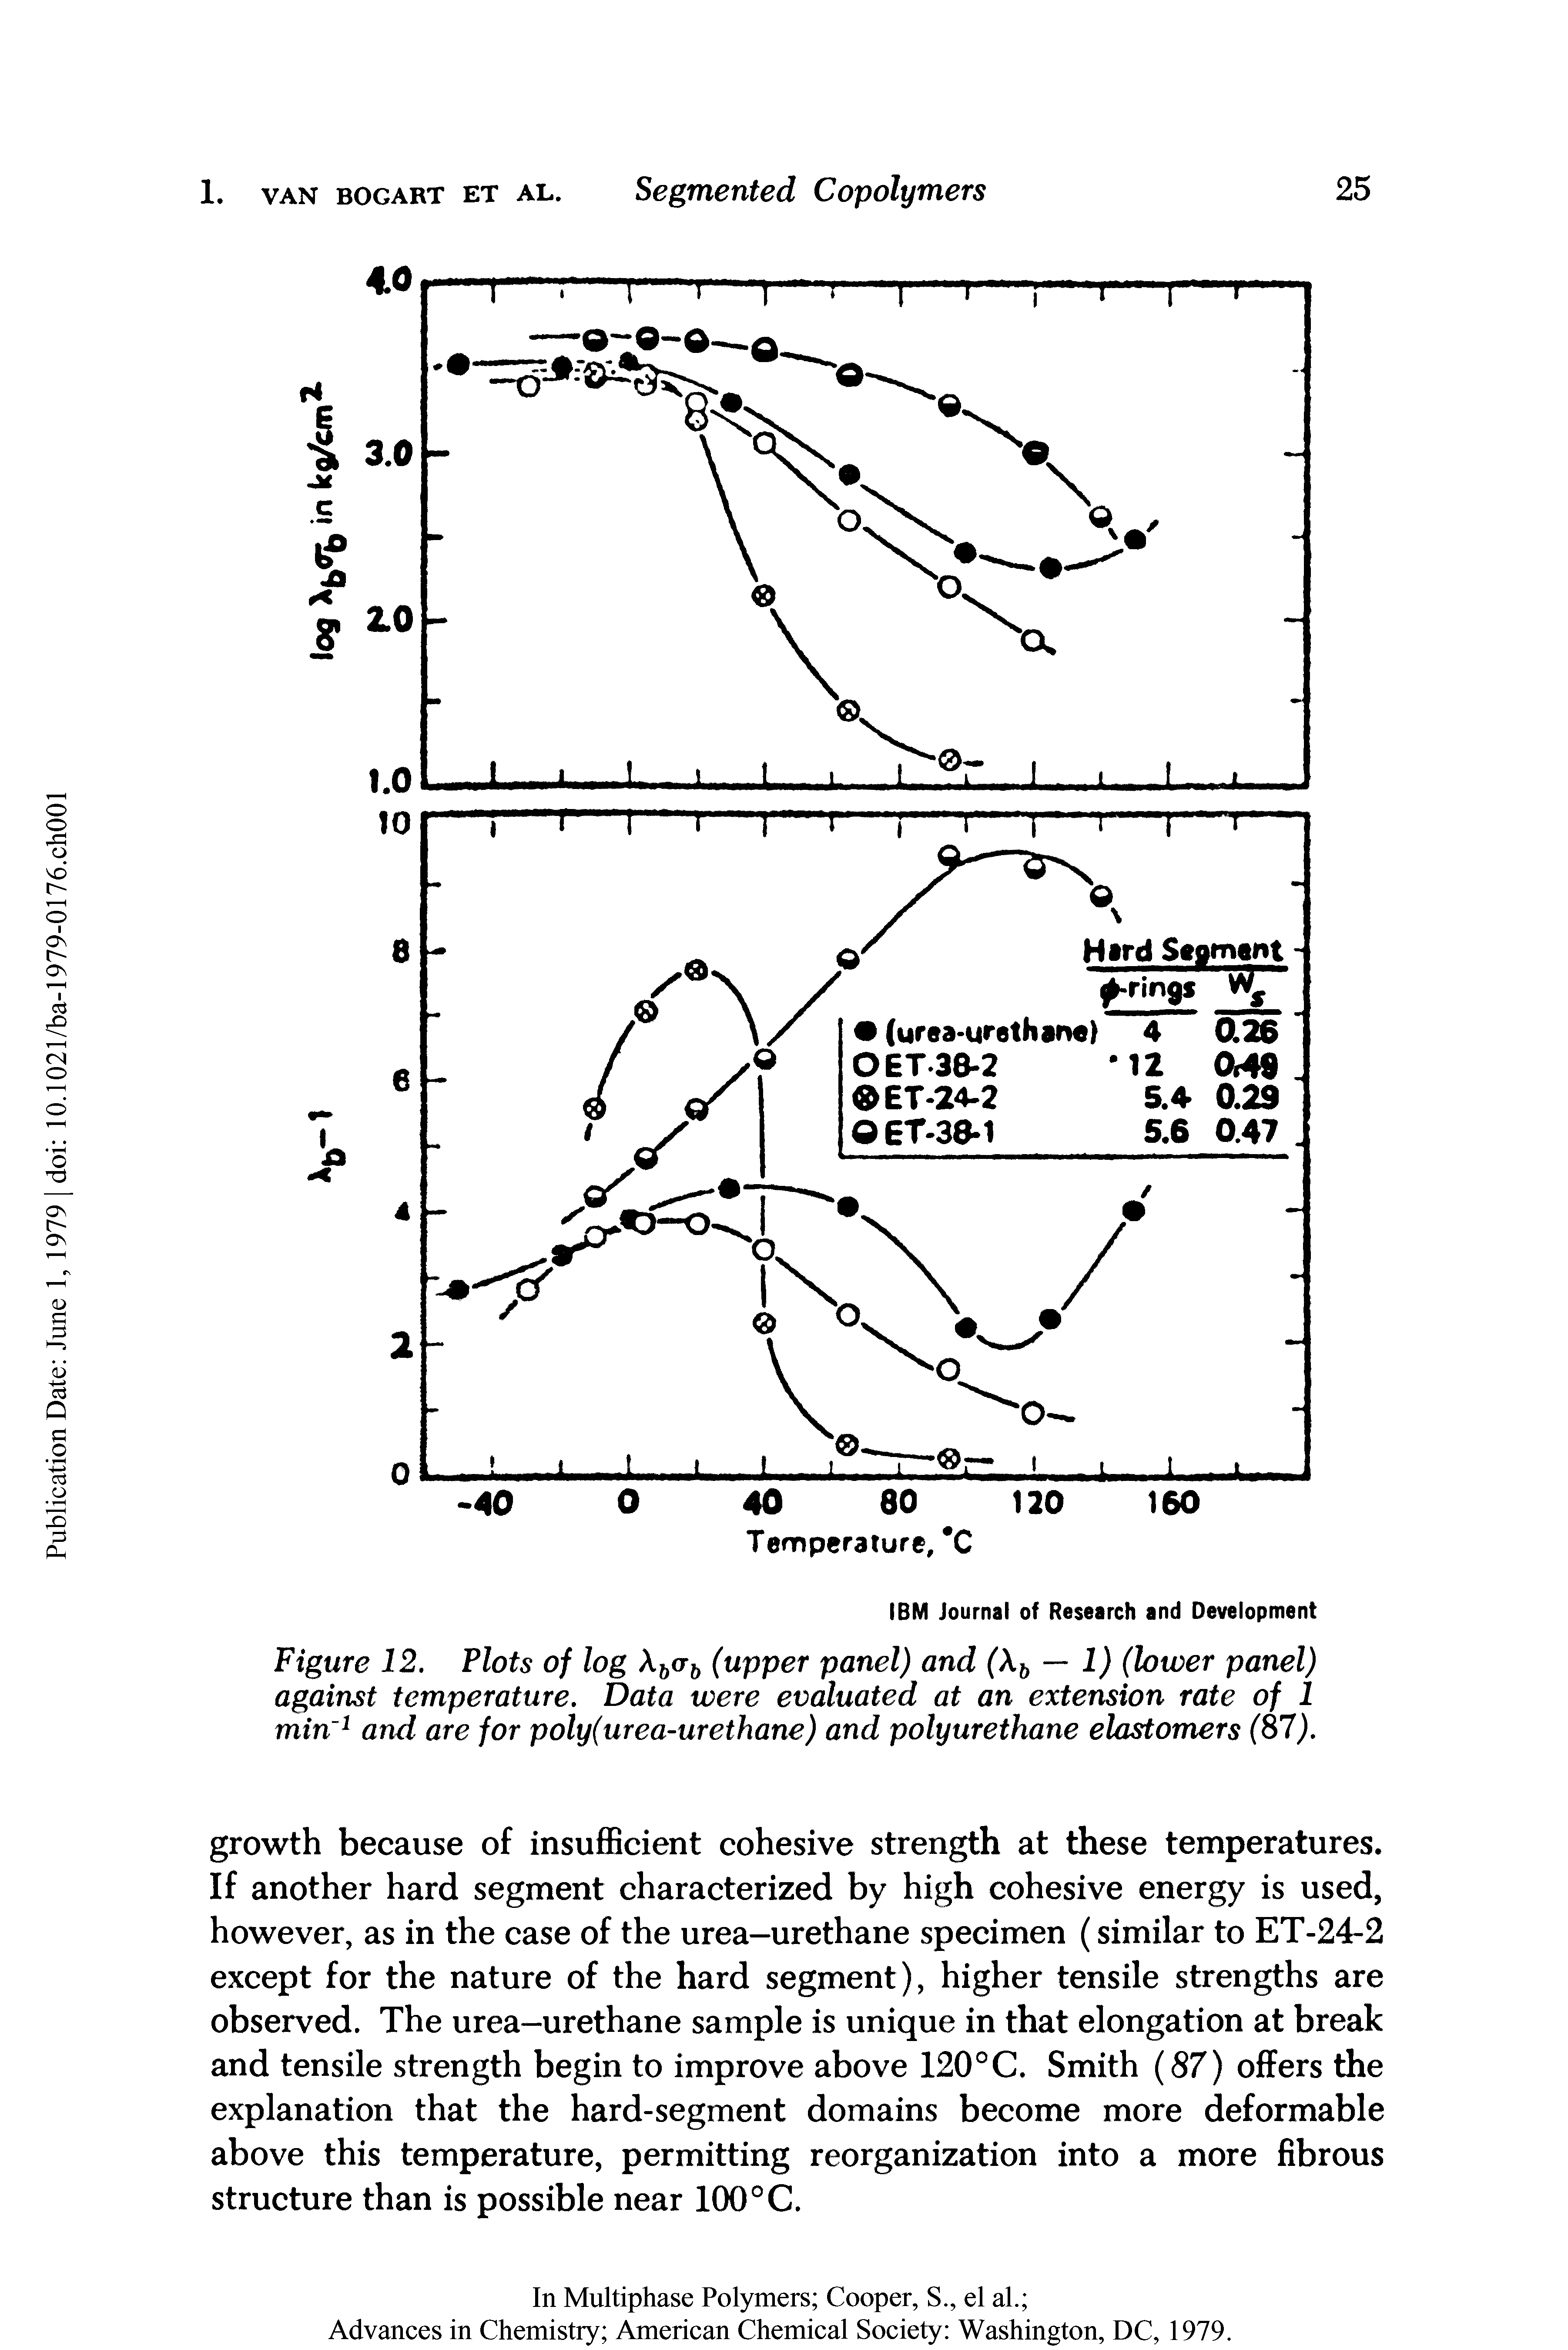 Figure 12. Plots of log Abcrb (upper panel) and ( b — 1) (lower panel) against temperature. Data were evaluated at an extension rate of 1 min 1 and are for poly(urea-urethane) and polyurethane elastomers (87).